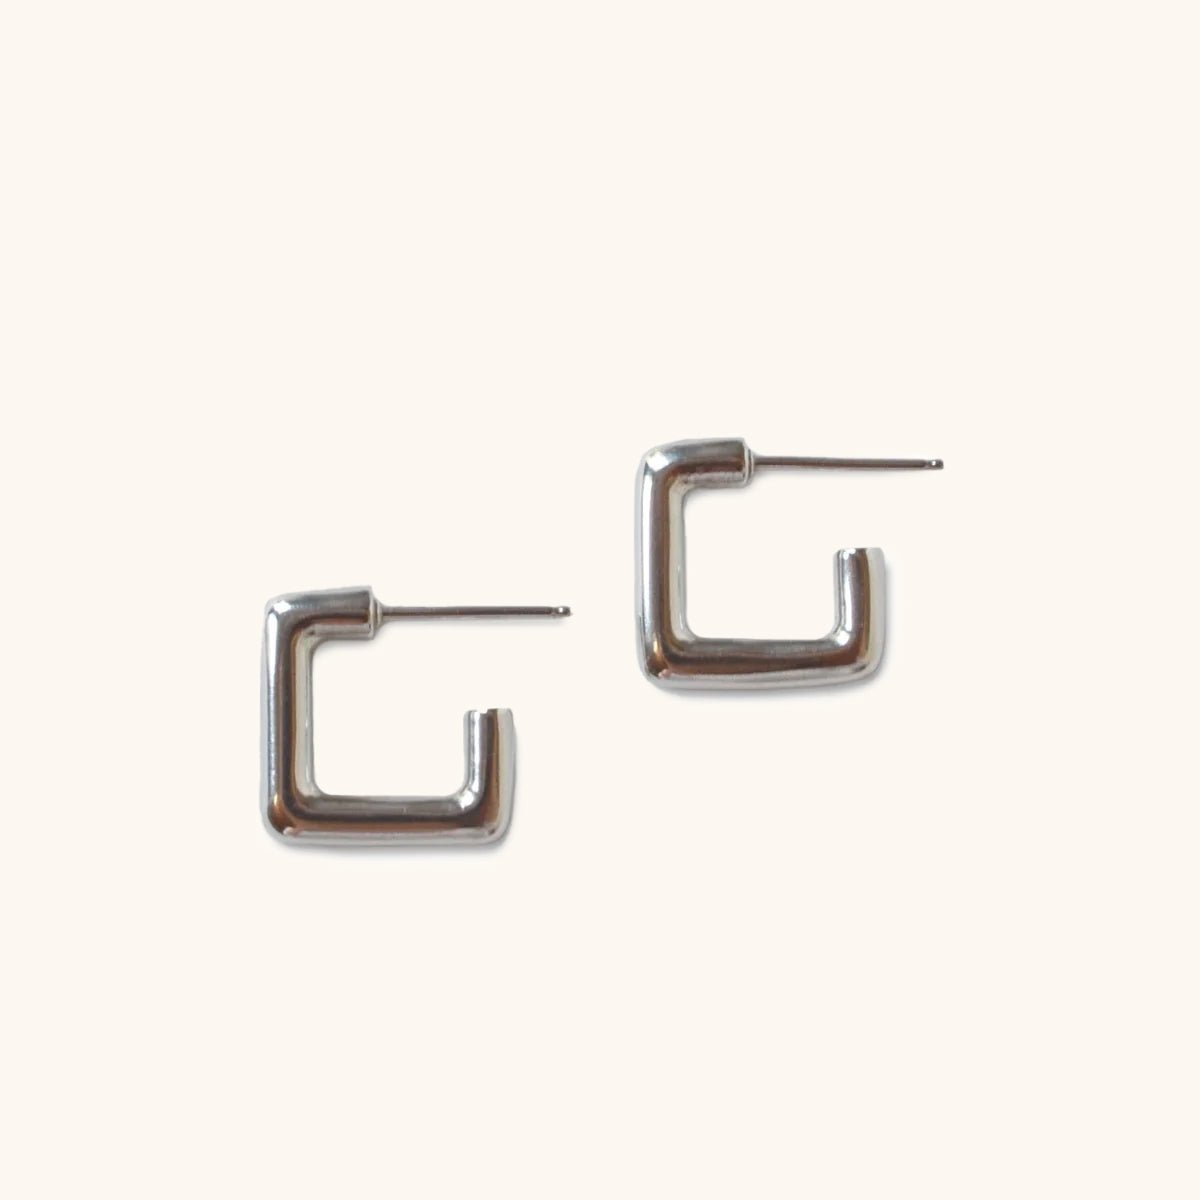 A smooth silver tone square hoop earring with sterling silver earrings posts. The Courtyard Hoops in Silver are designed and handcrafted by Natalie Joy in Portland, Oregon.